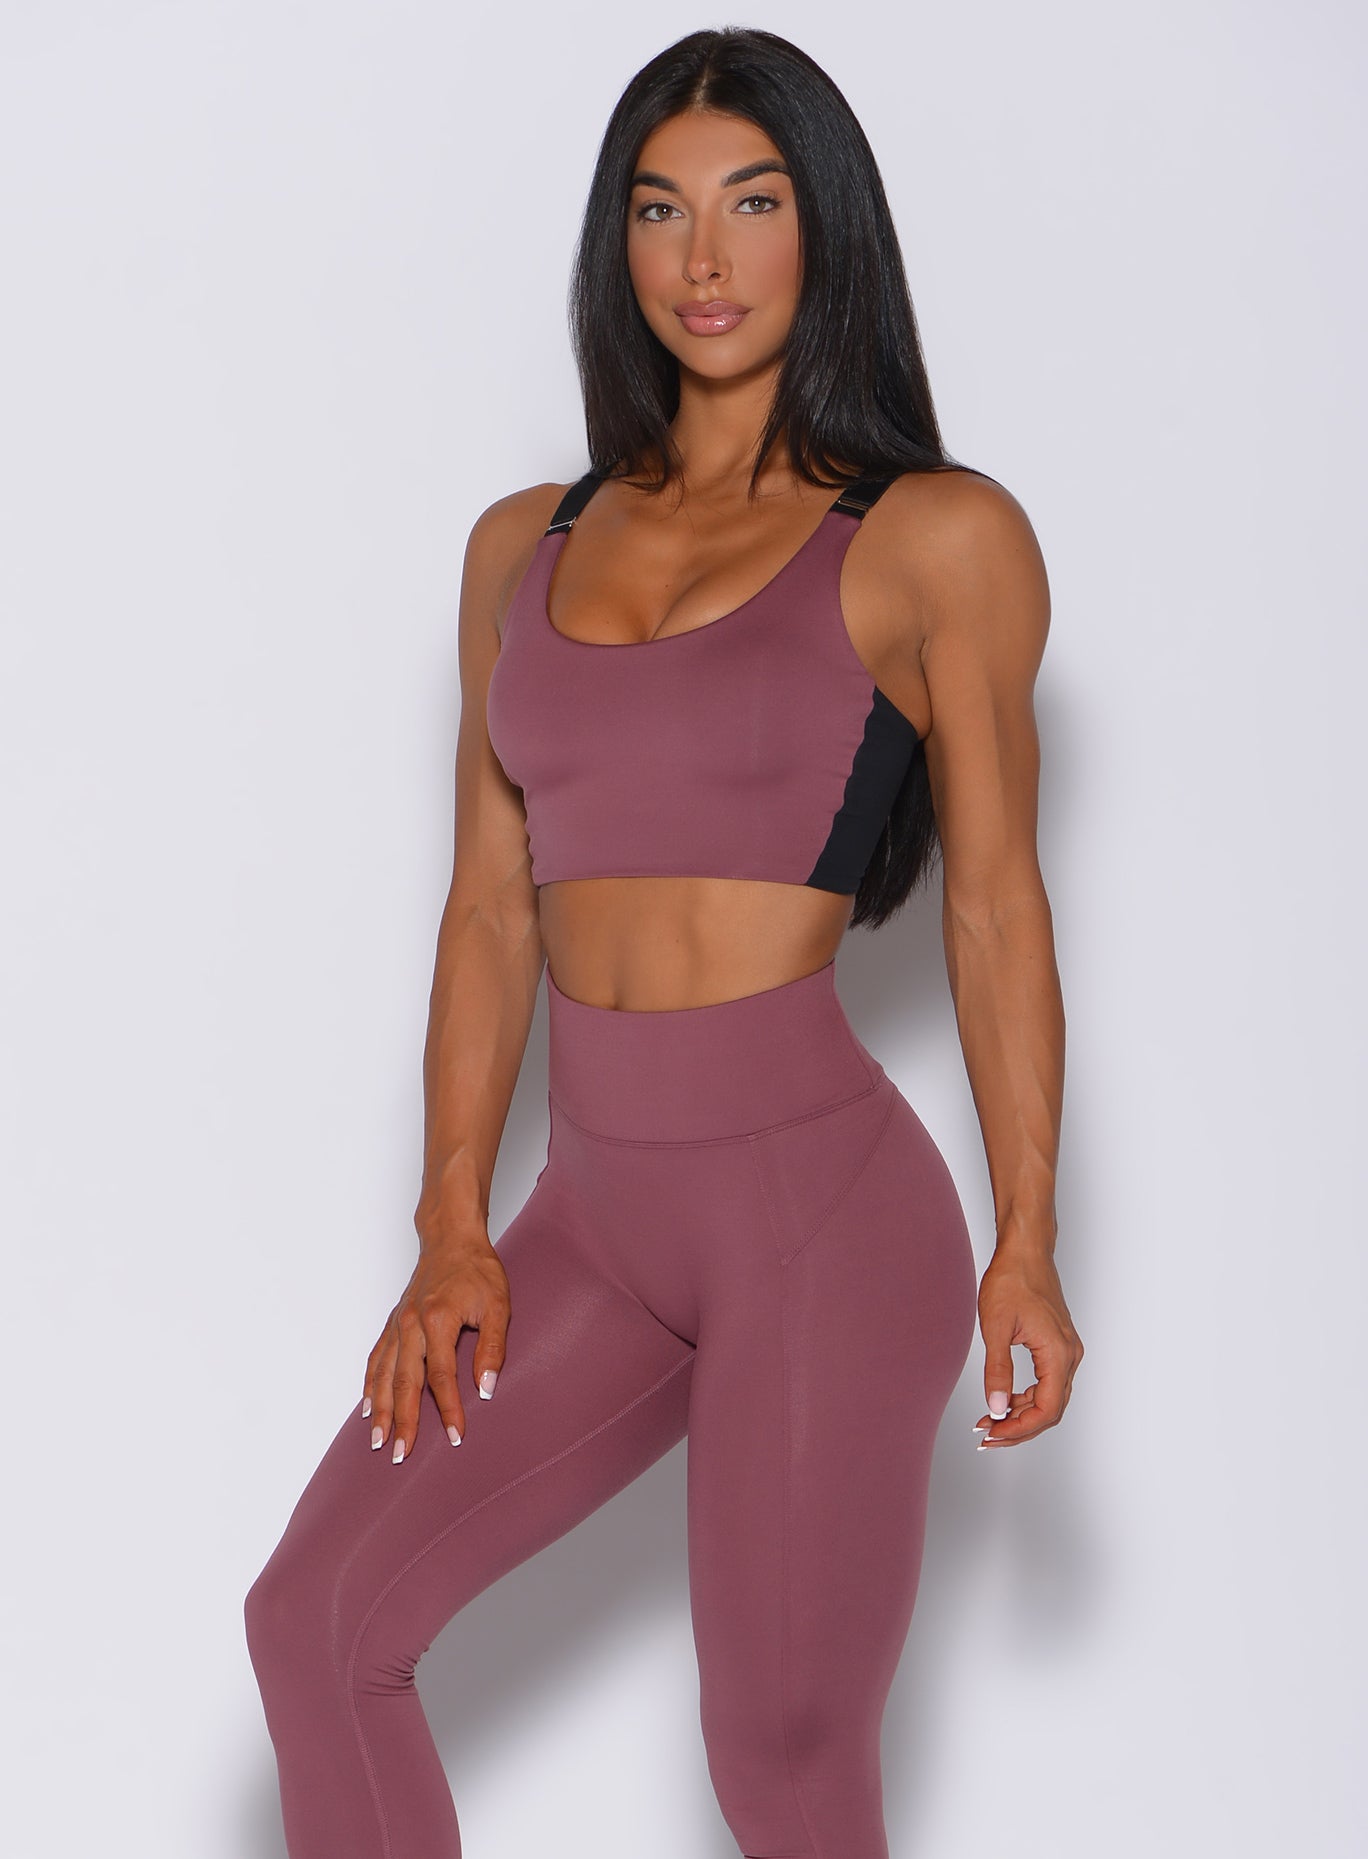 Model facing forward wearing our banded sports bra in merlot color and a matching leggings